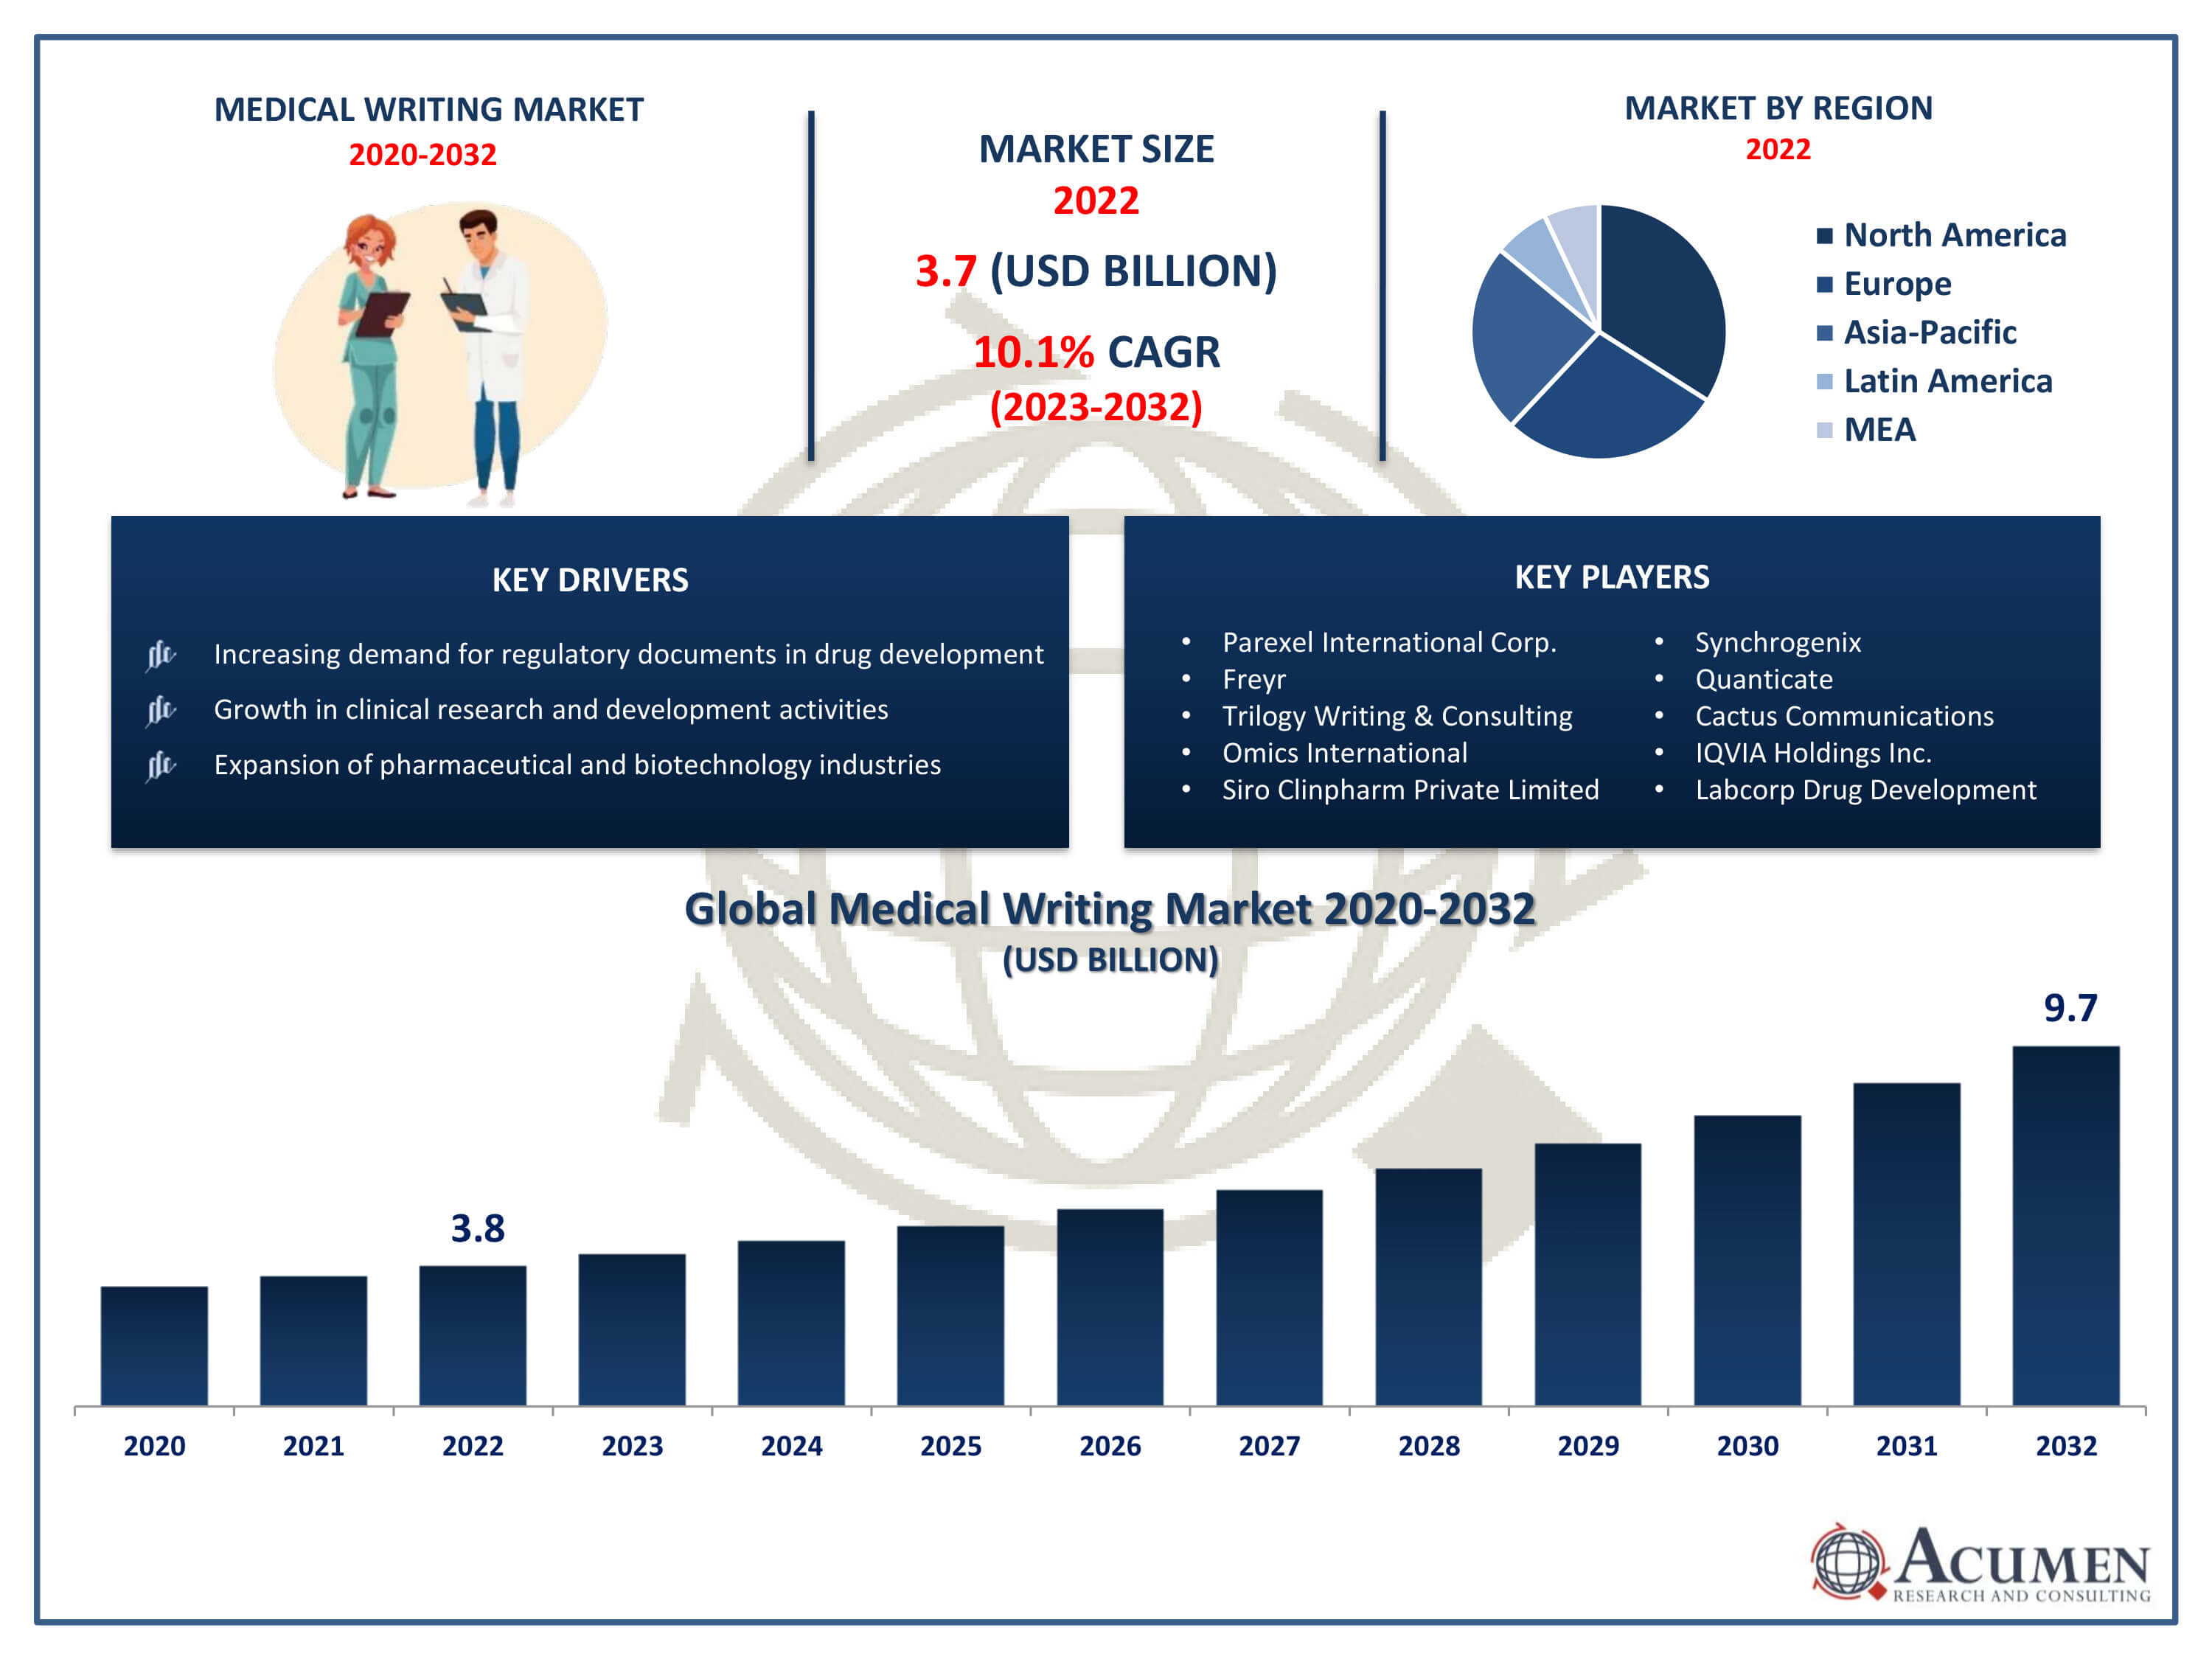 Medical Writing Market Trends